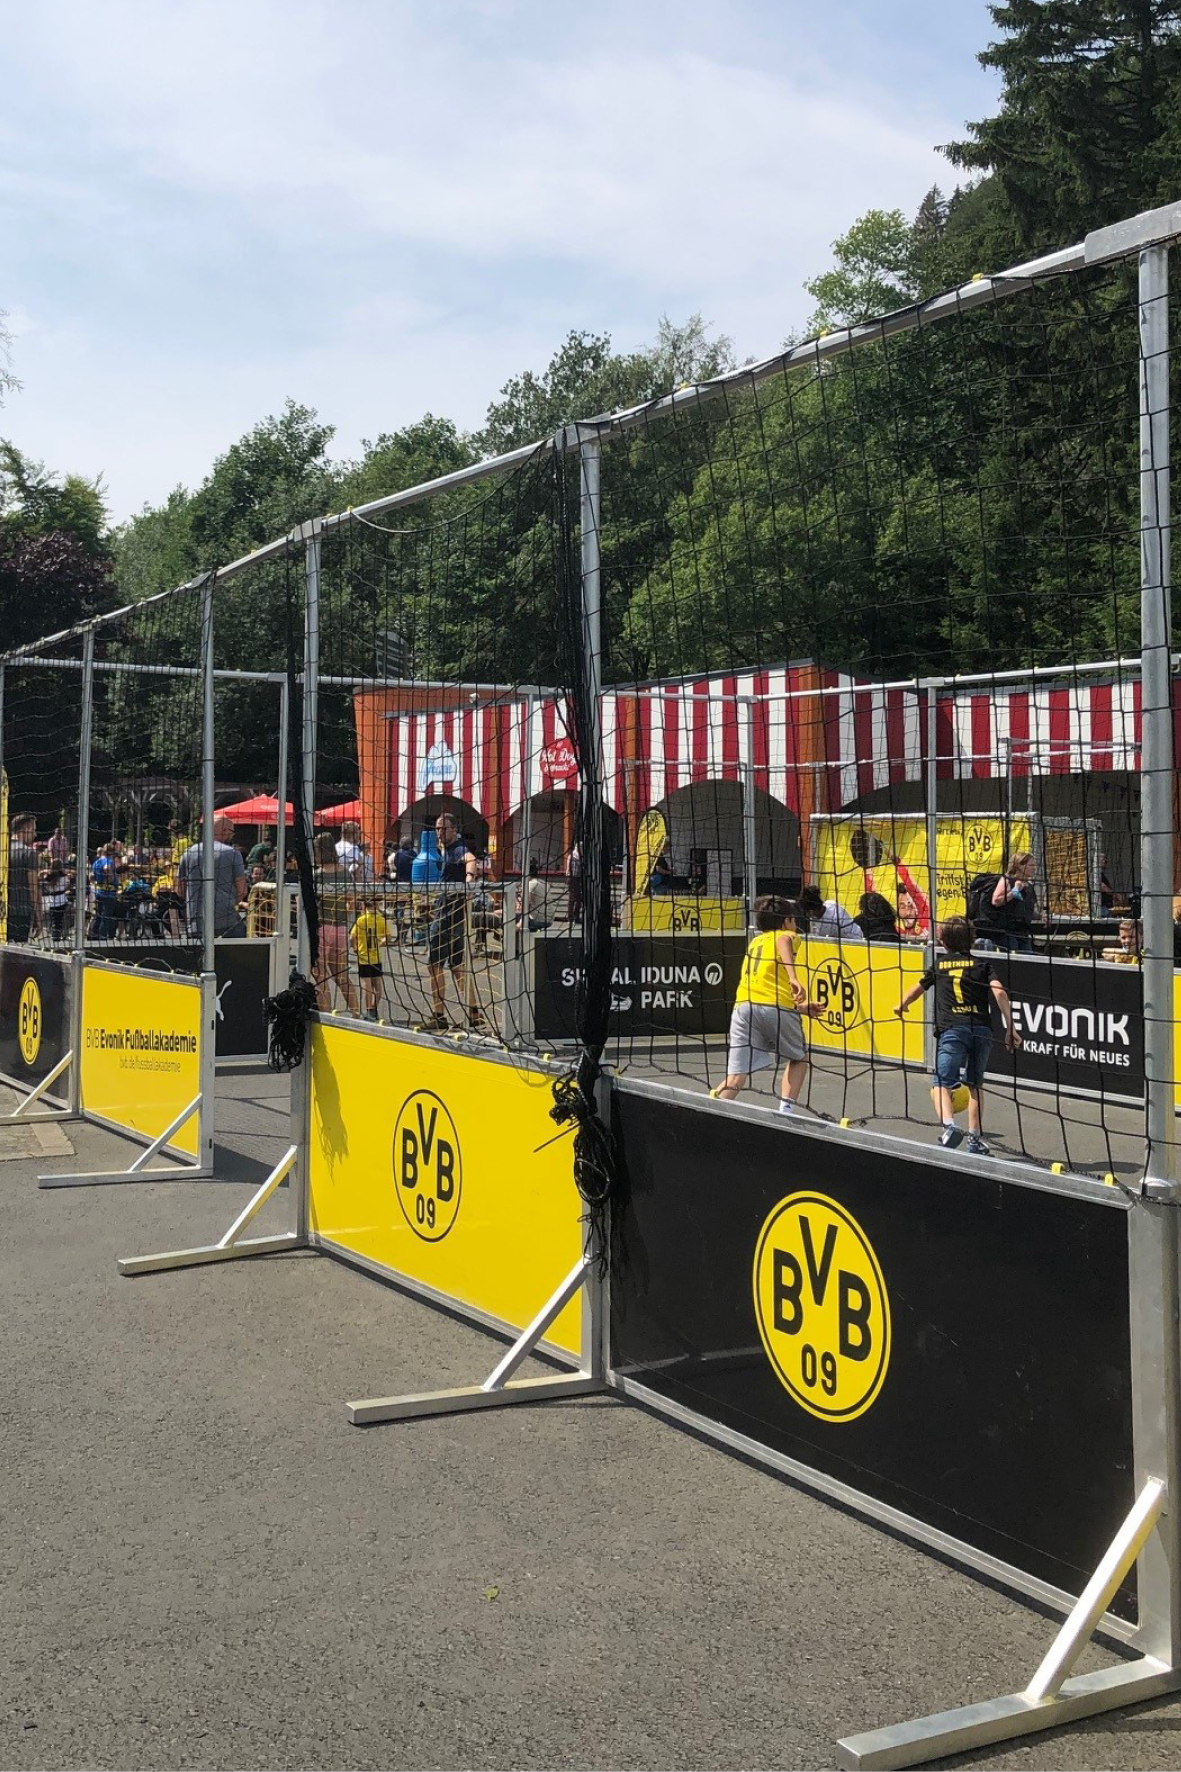 You are currently viewing 5. BVB KidsClub-Erlebnistag im FORT FUN Abenteuerland